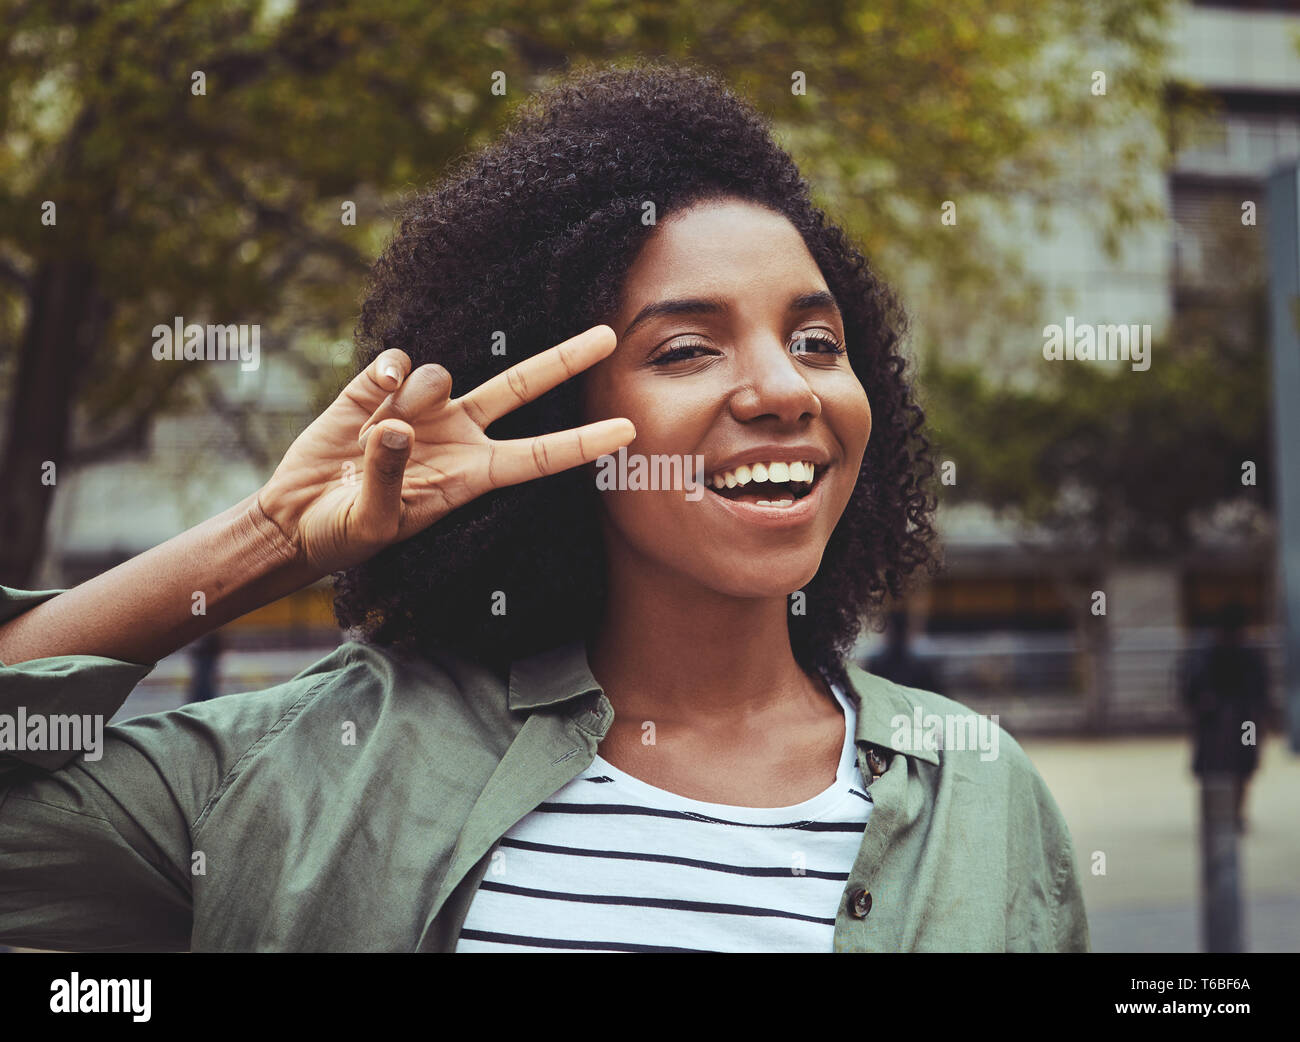 Smiling young woman showing peace sign Banque D'Images